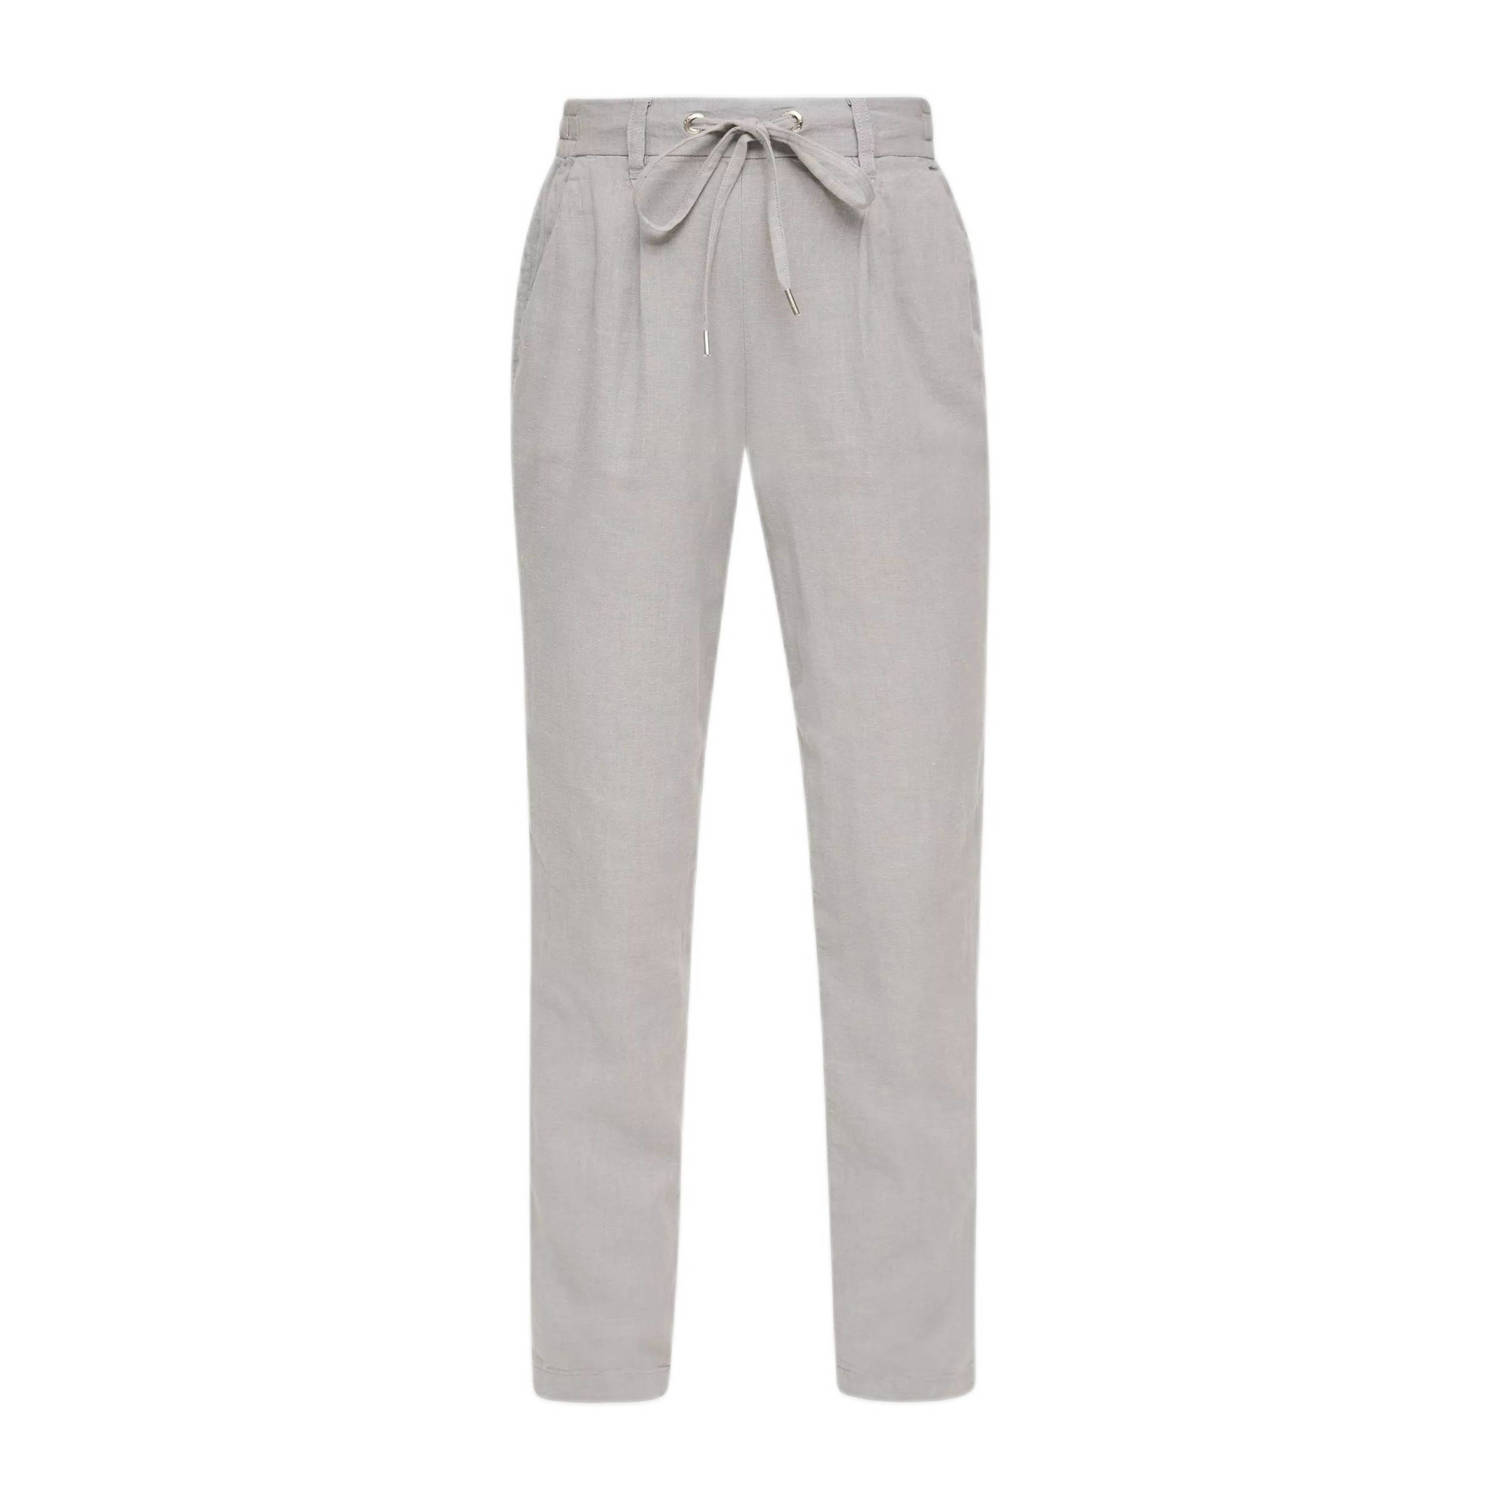 Q S by s.Oliver high waist tapered fit pantalon grijs